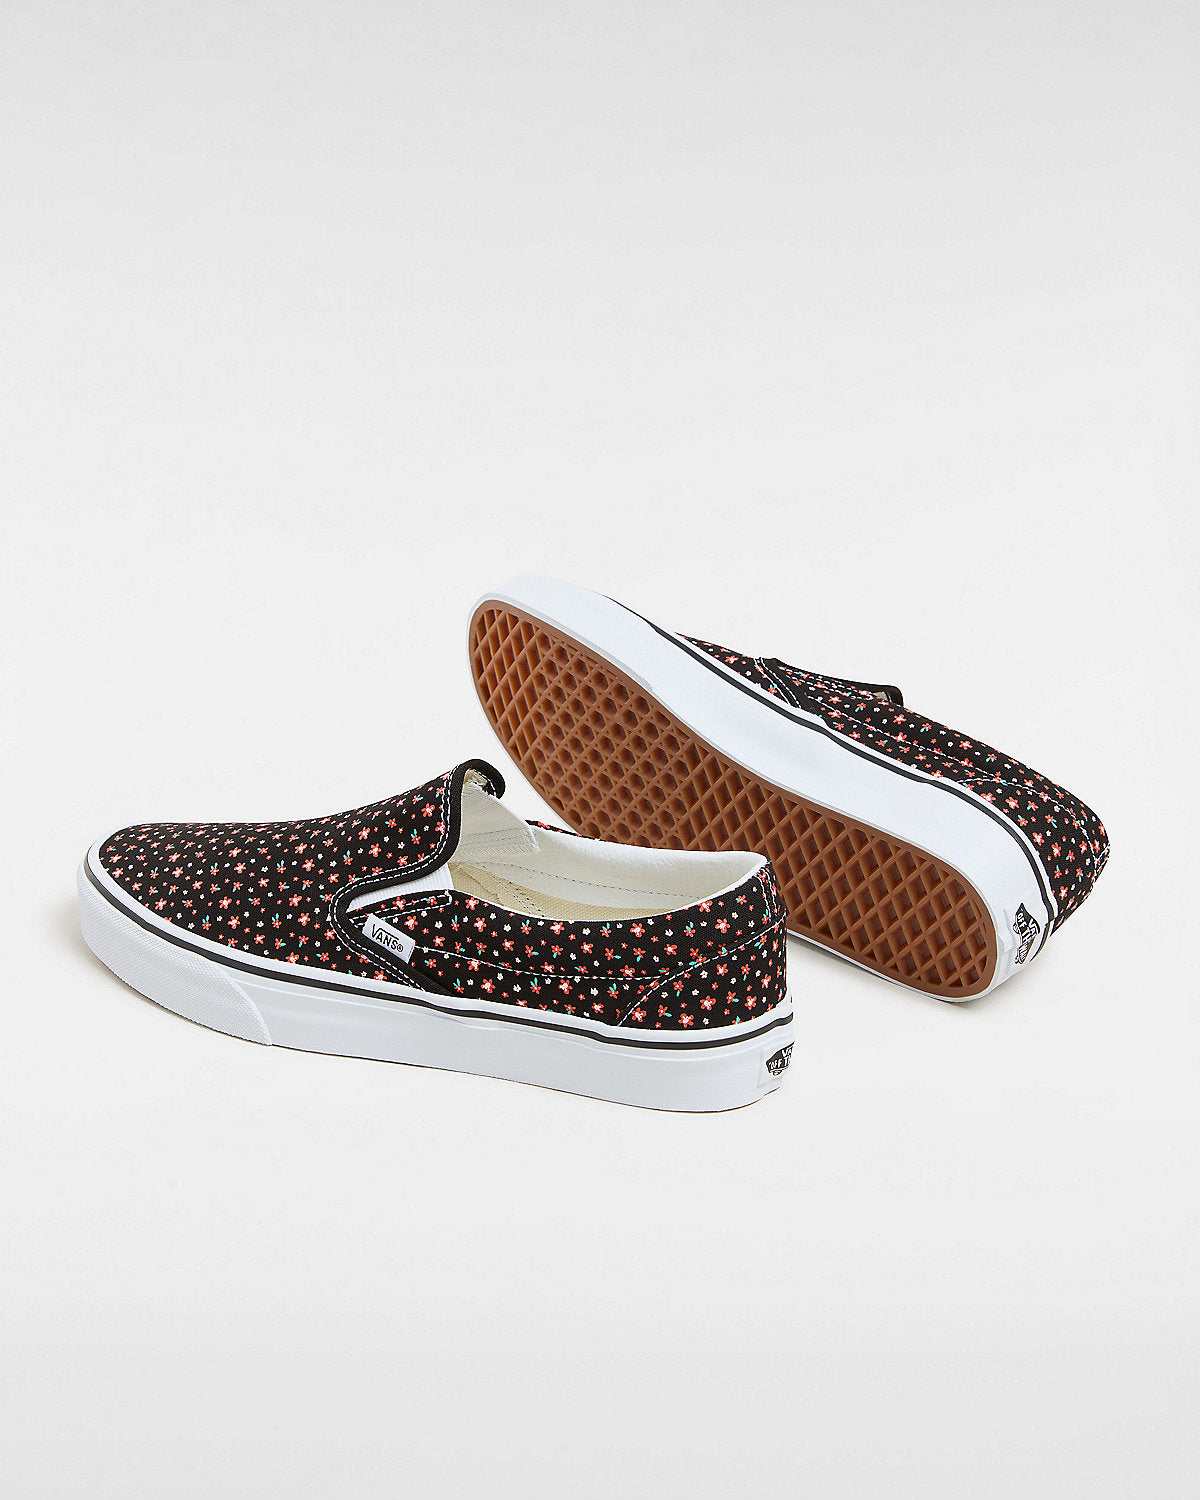 VANS Unisex Classic Ditsy Floral Slip-On Trainers - Black